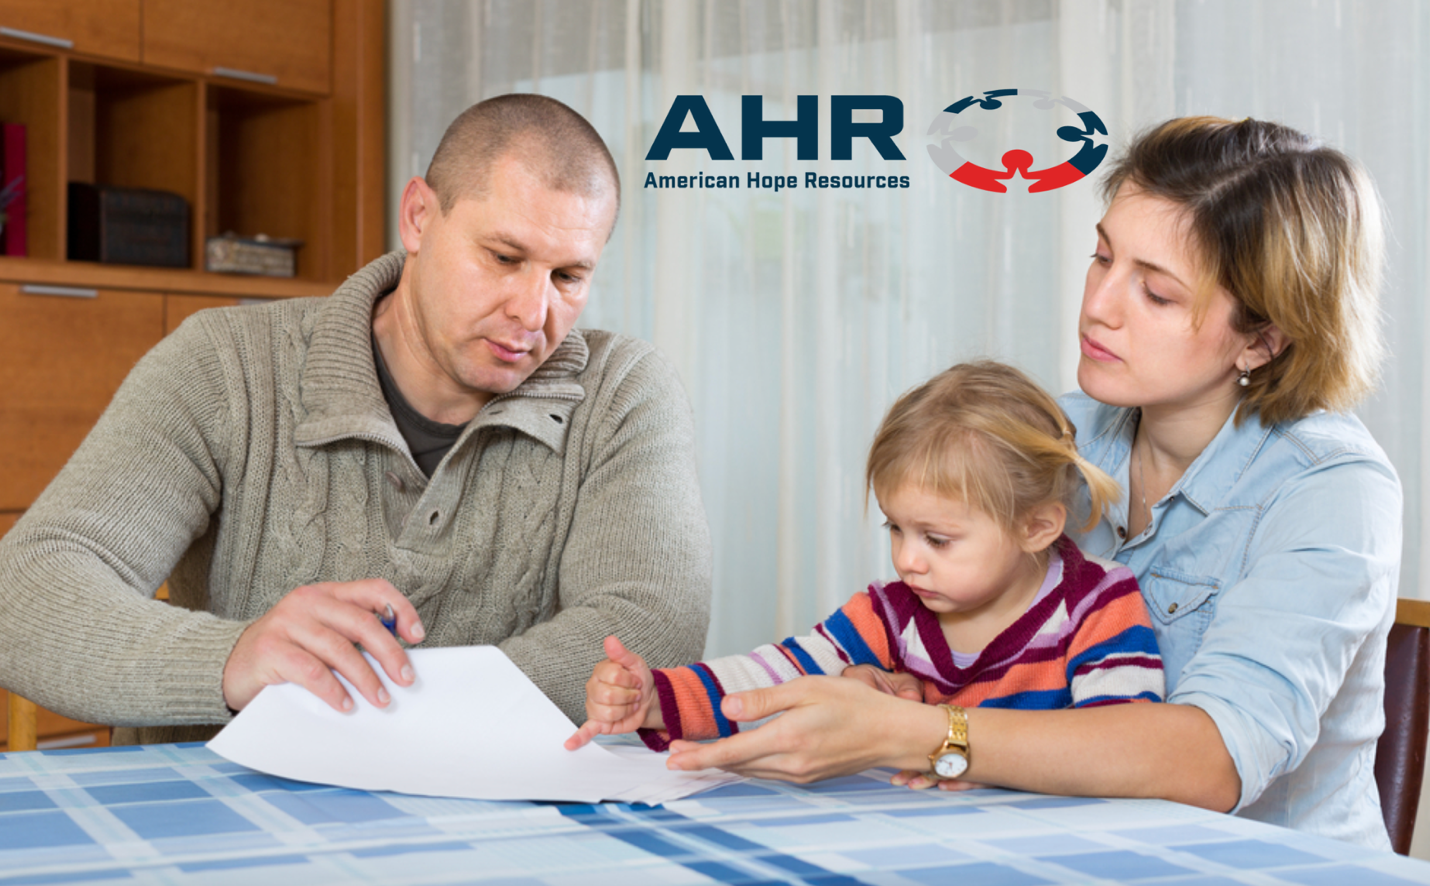 American Hope Resources helps struggling families.